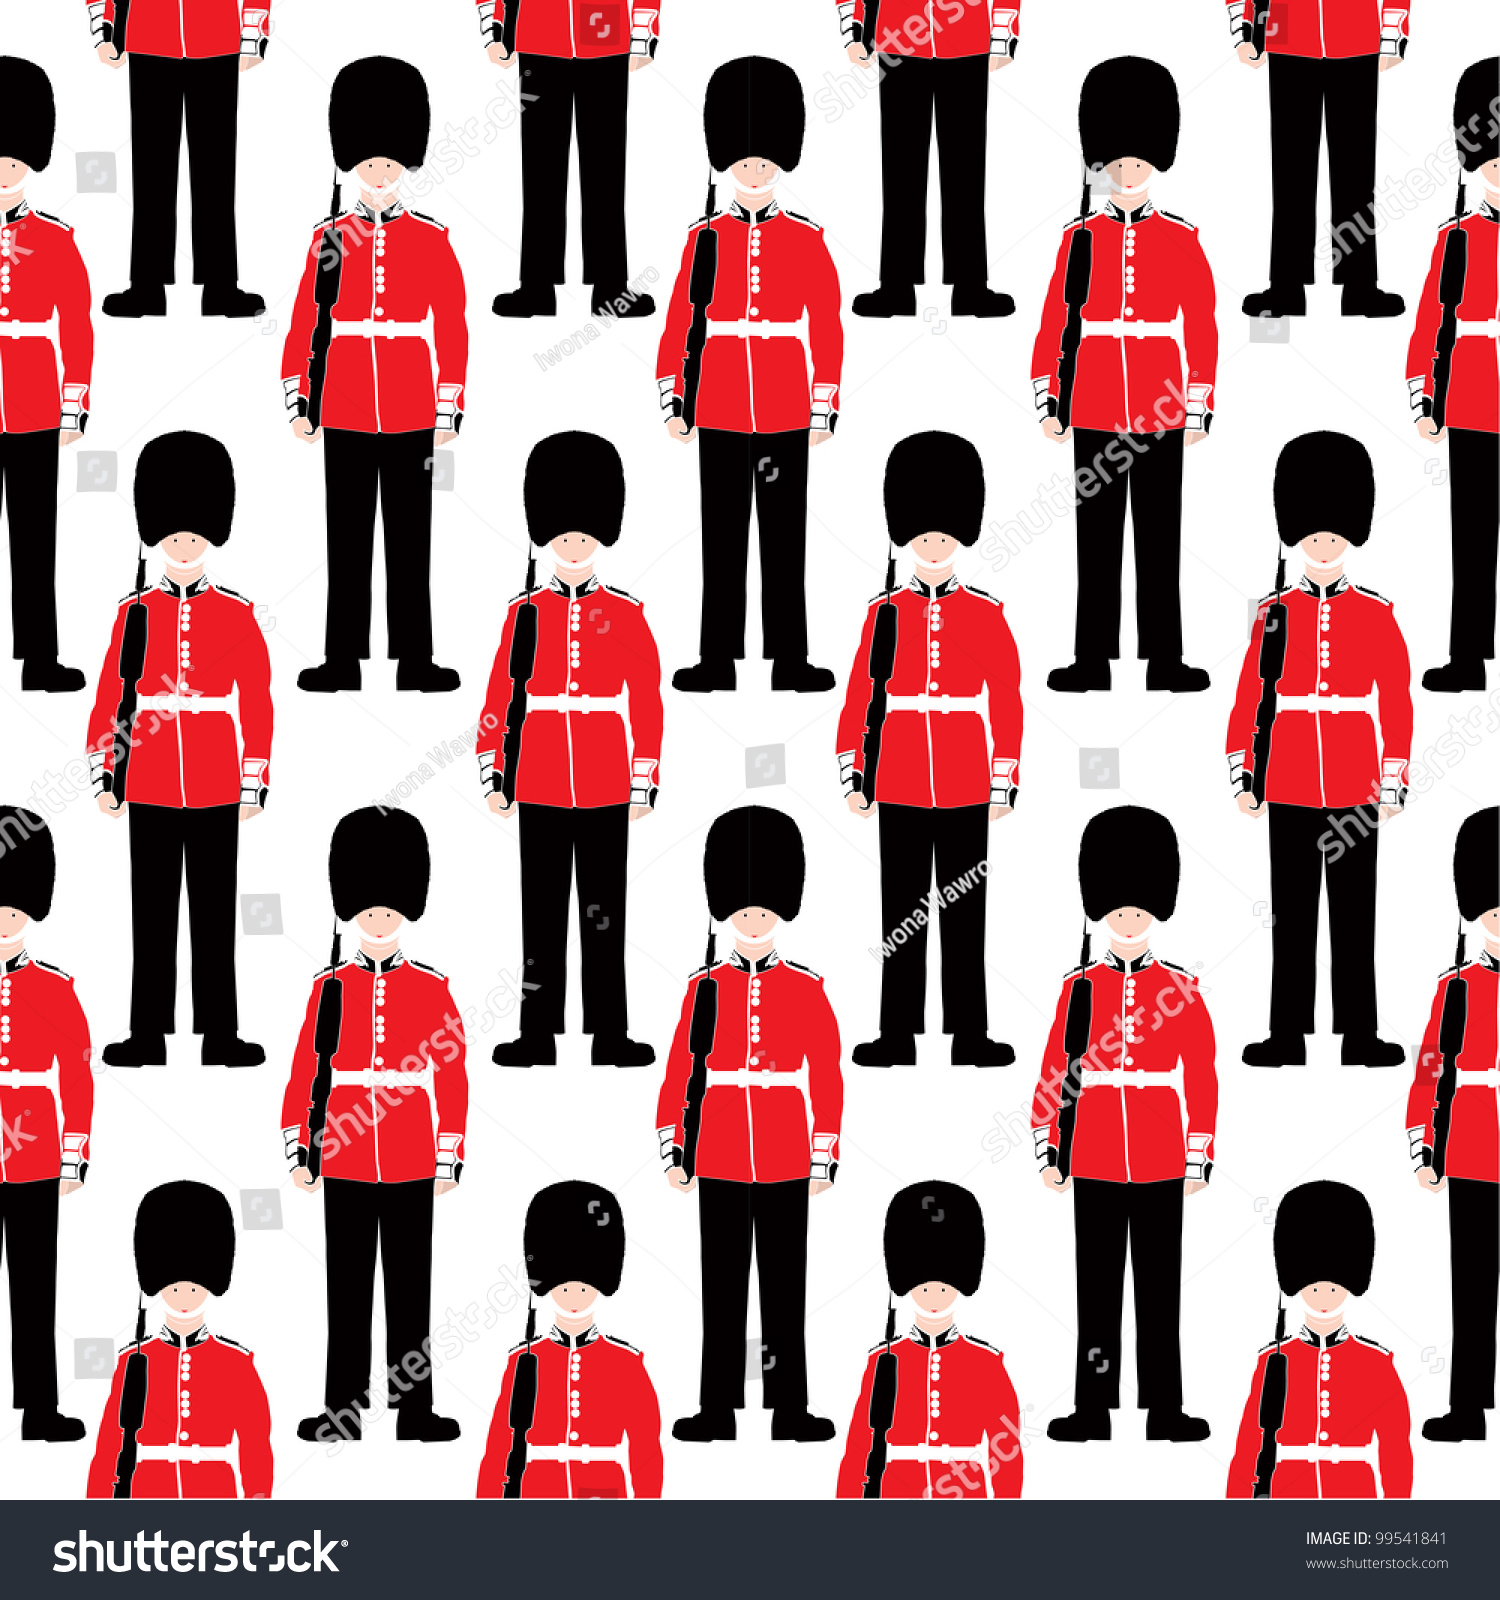 SVG of Beefeater soldier seamless vector pattern -  London Symbol - Very detailed, isolated illustration - White background svg